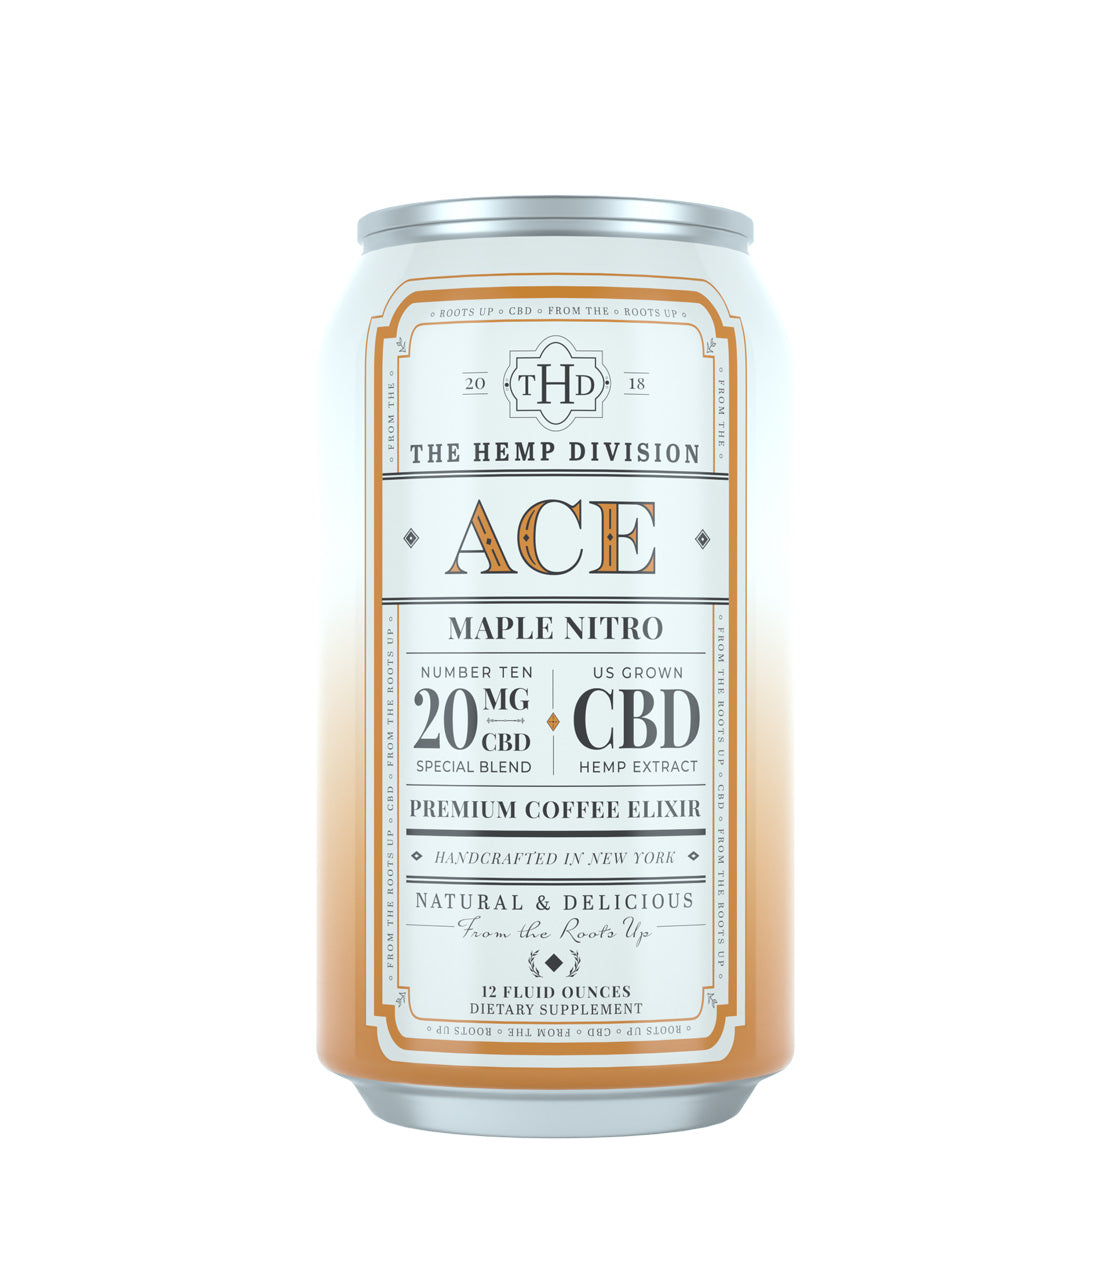 Ace - 20 MG CBD - 12 oz. Can Case of 8 Cans - Harney & Sons Fine Teas